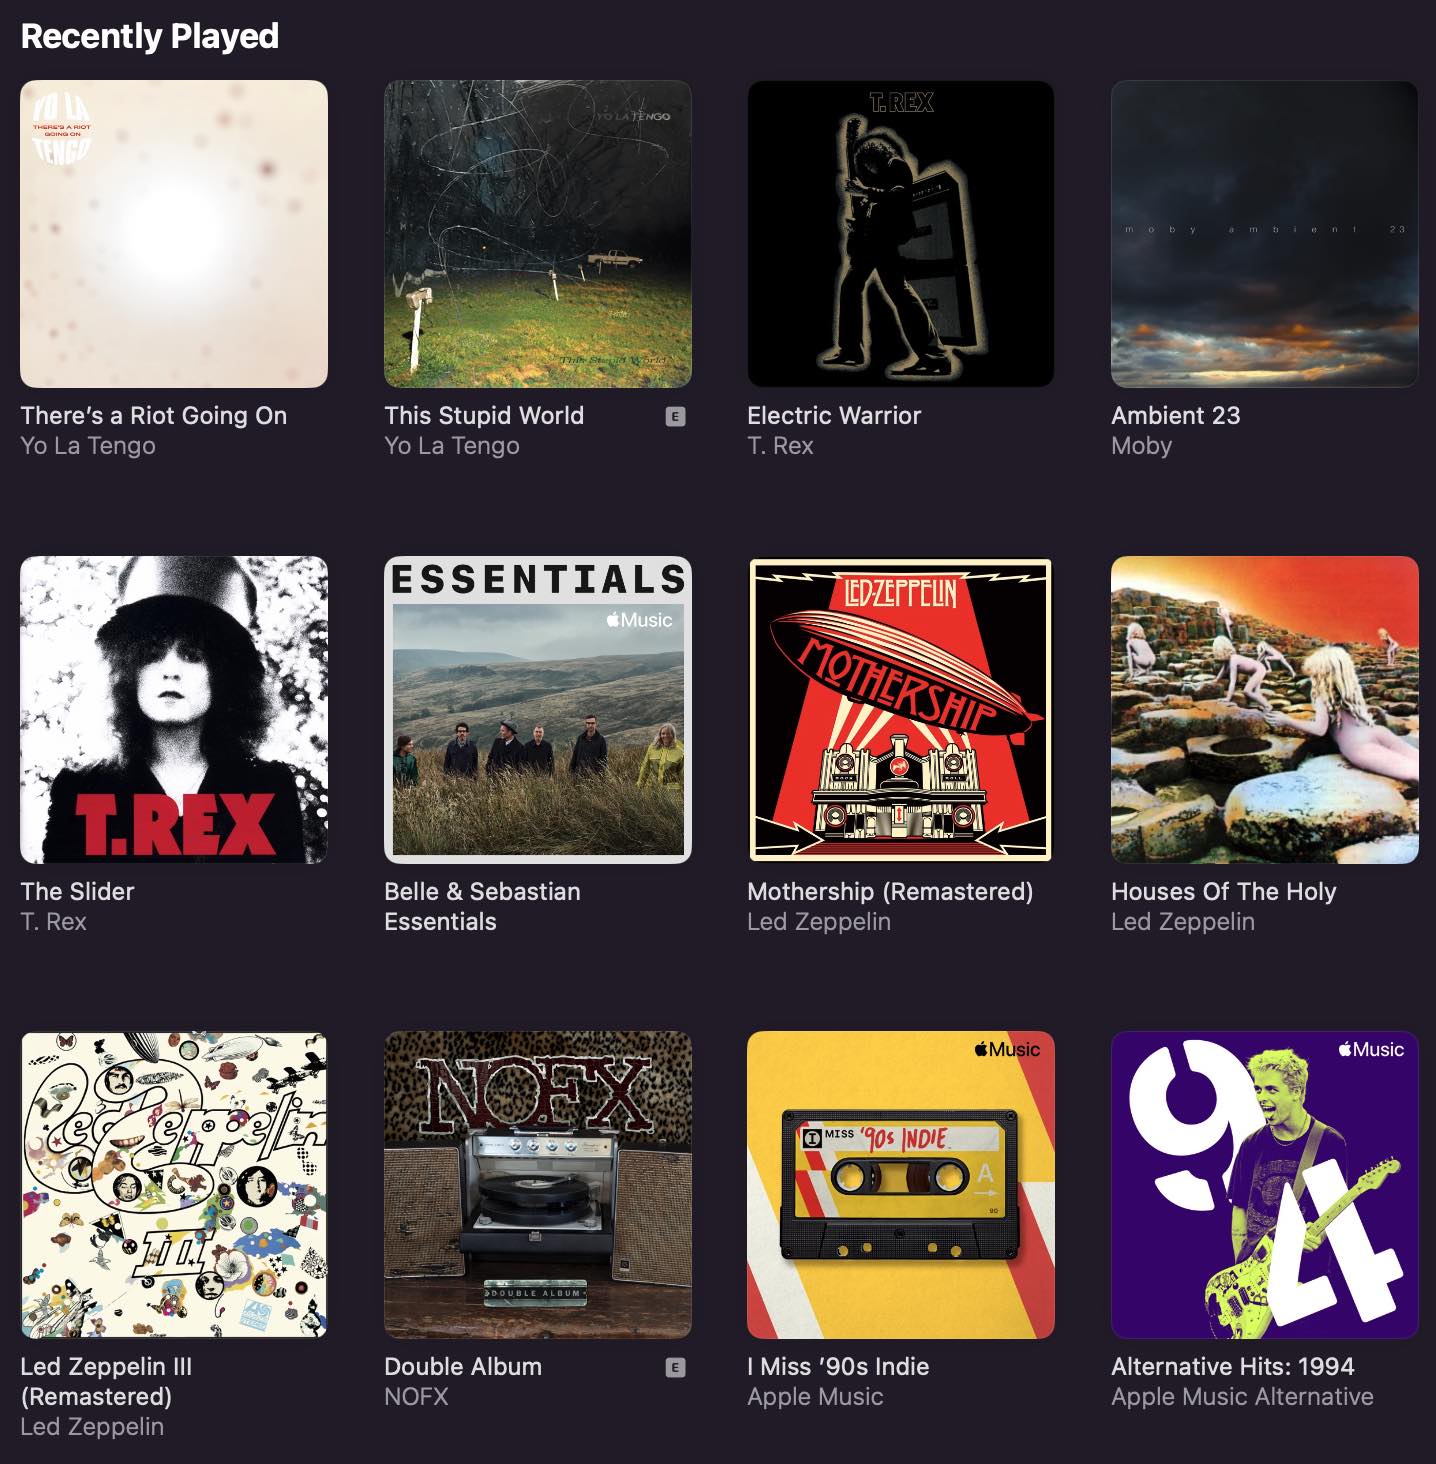 Albums that I've listened to this past December, including T.Rex, Yo La Tengo and others.